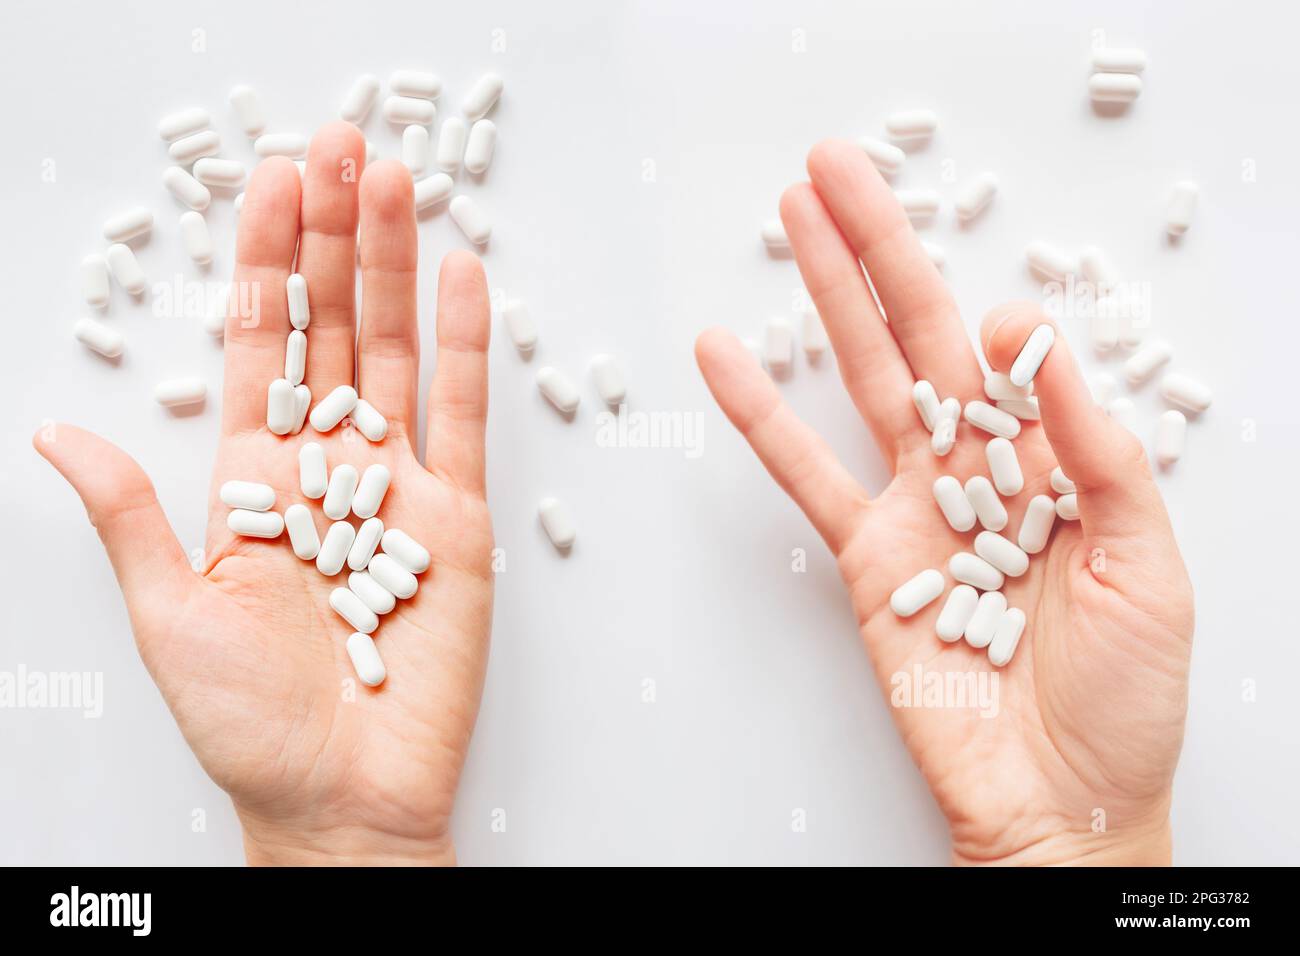 Palm hands full of white scattering pills. Capsules with medicines on light background. Flat lay, top view. Stock Photo